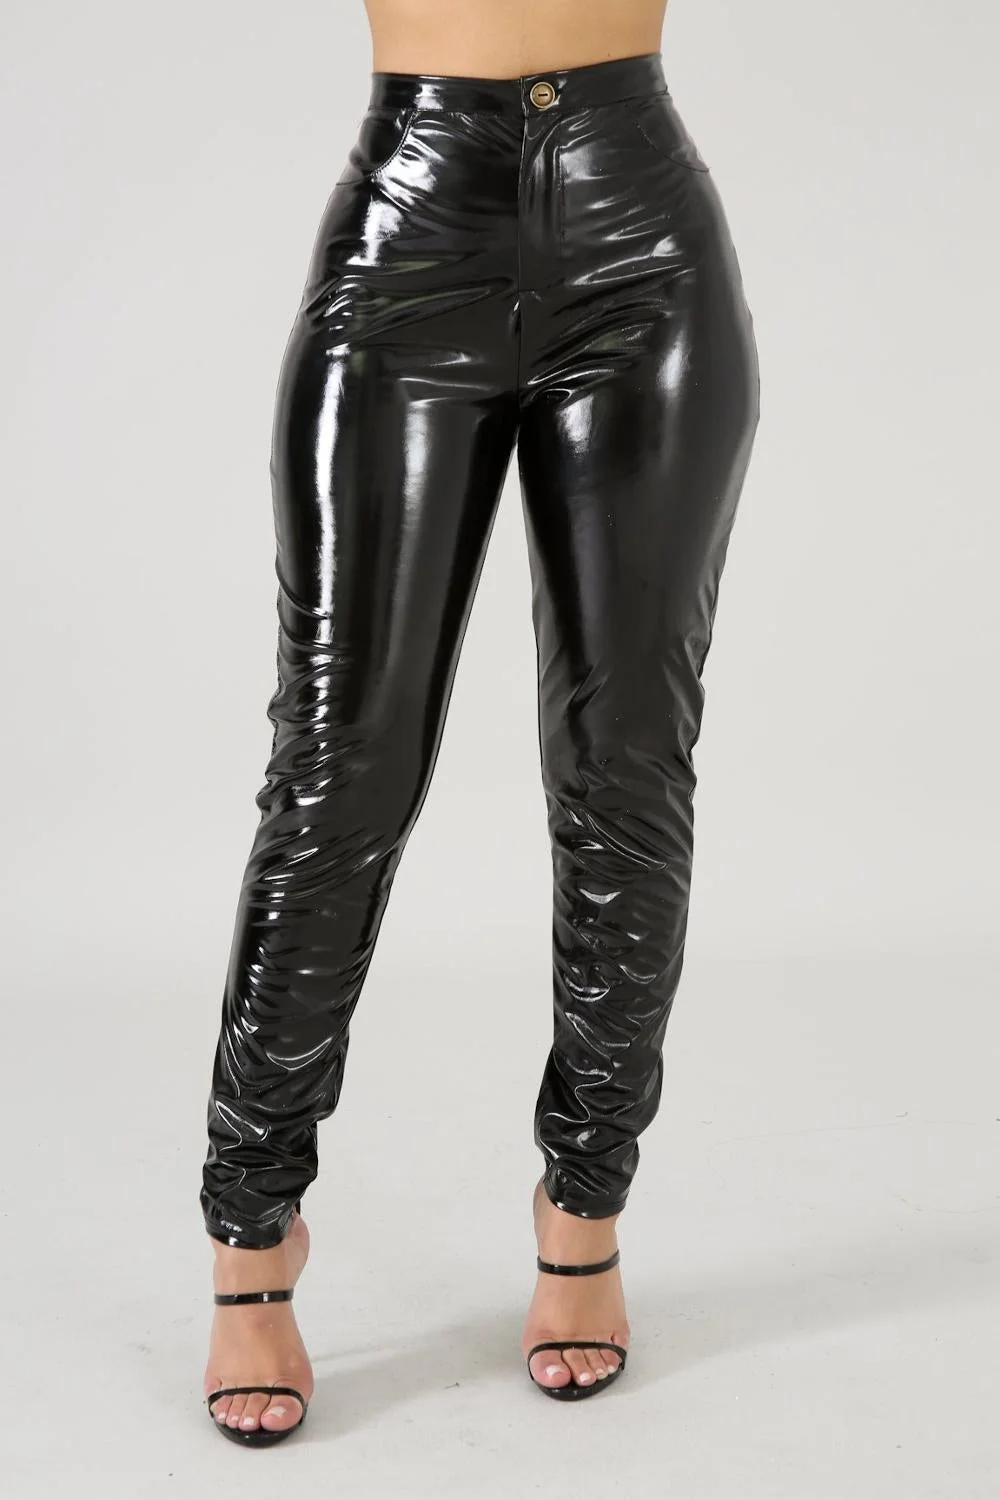 Women Latex Faux Pu Leather Pants Trousers Push Up High Waist Skinny Pants Pencil Fall Winter Solid Color Sexy Pants Female 104